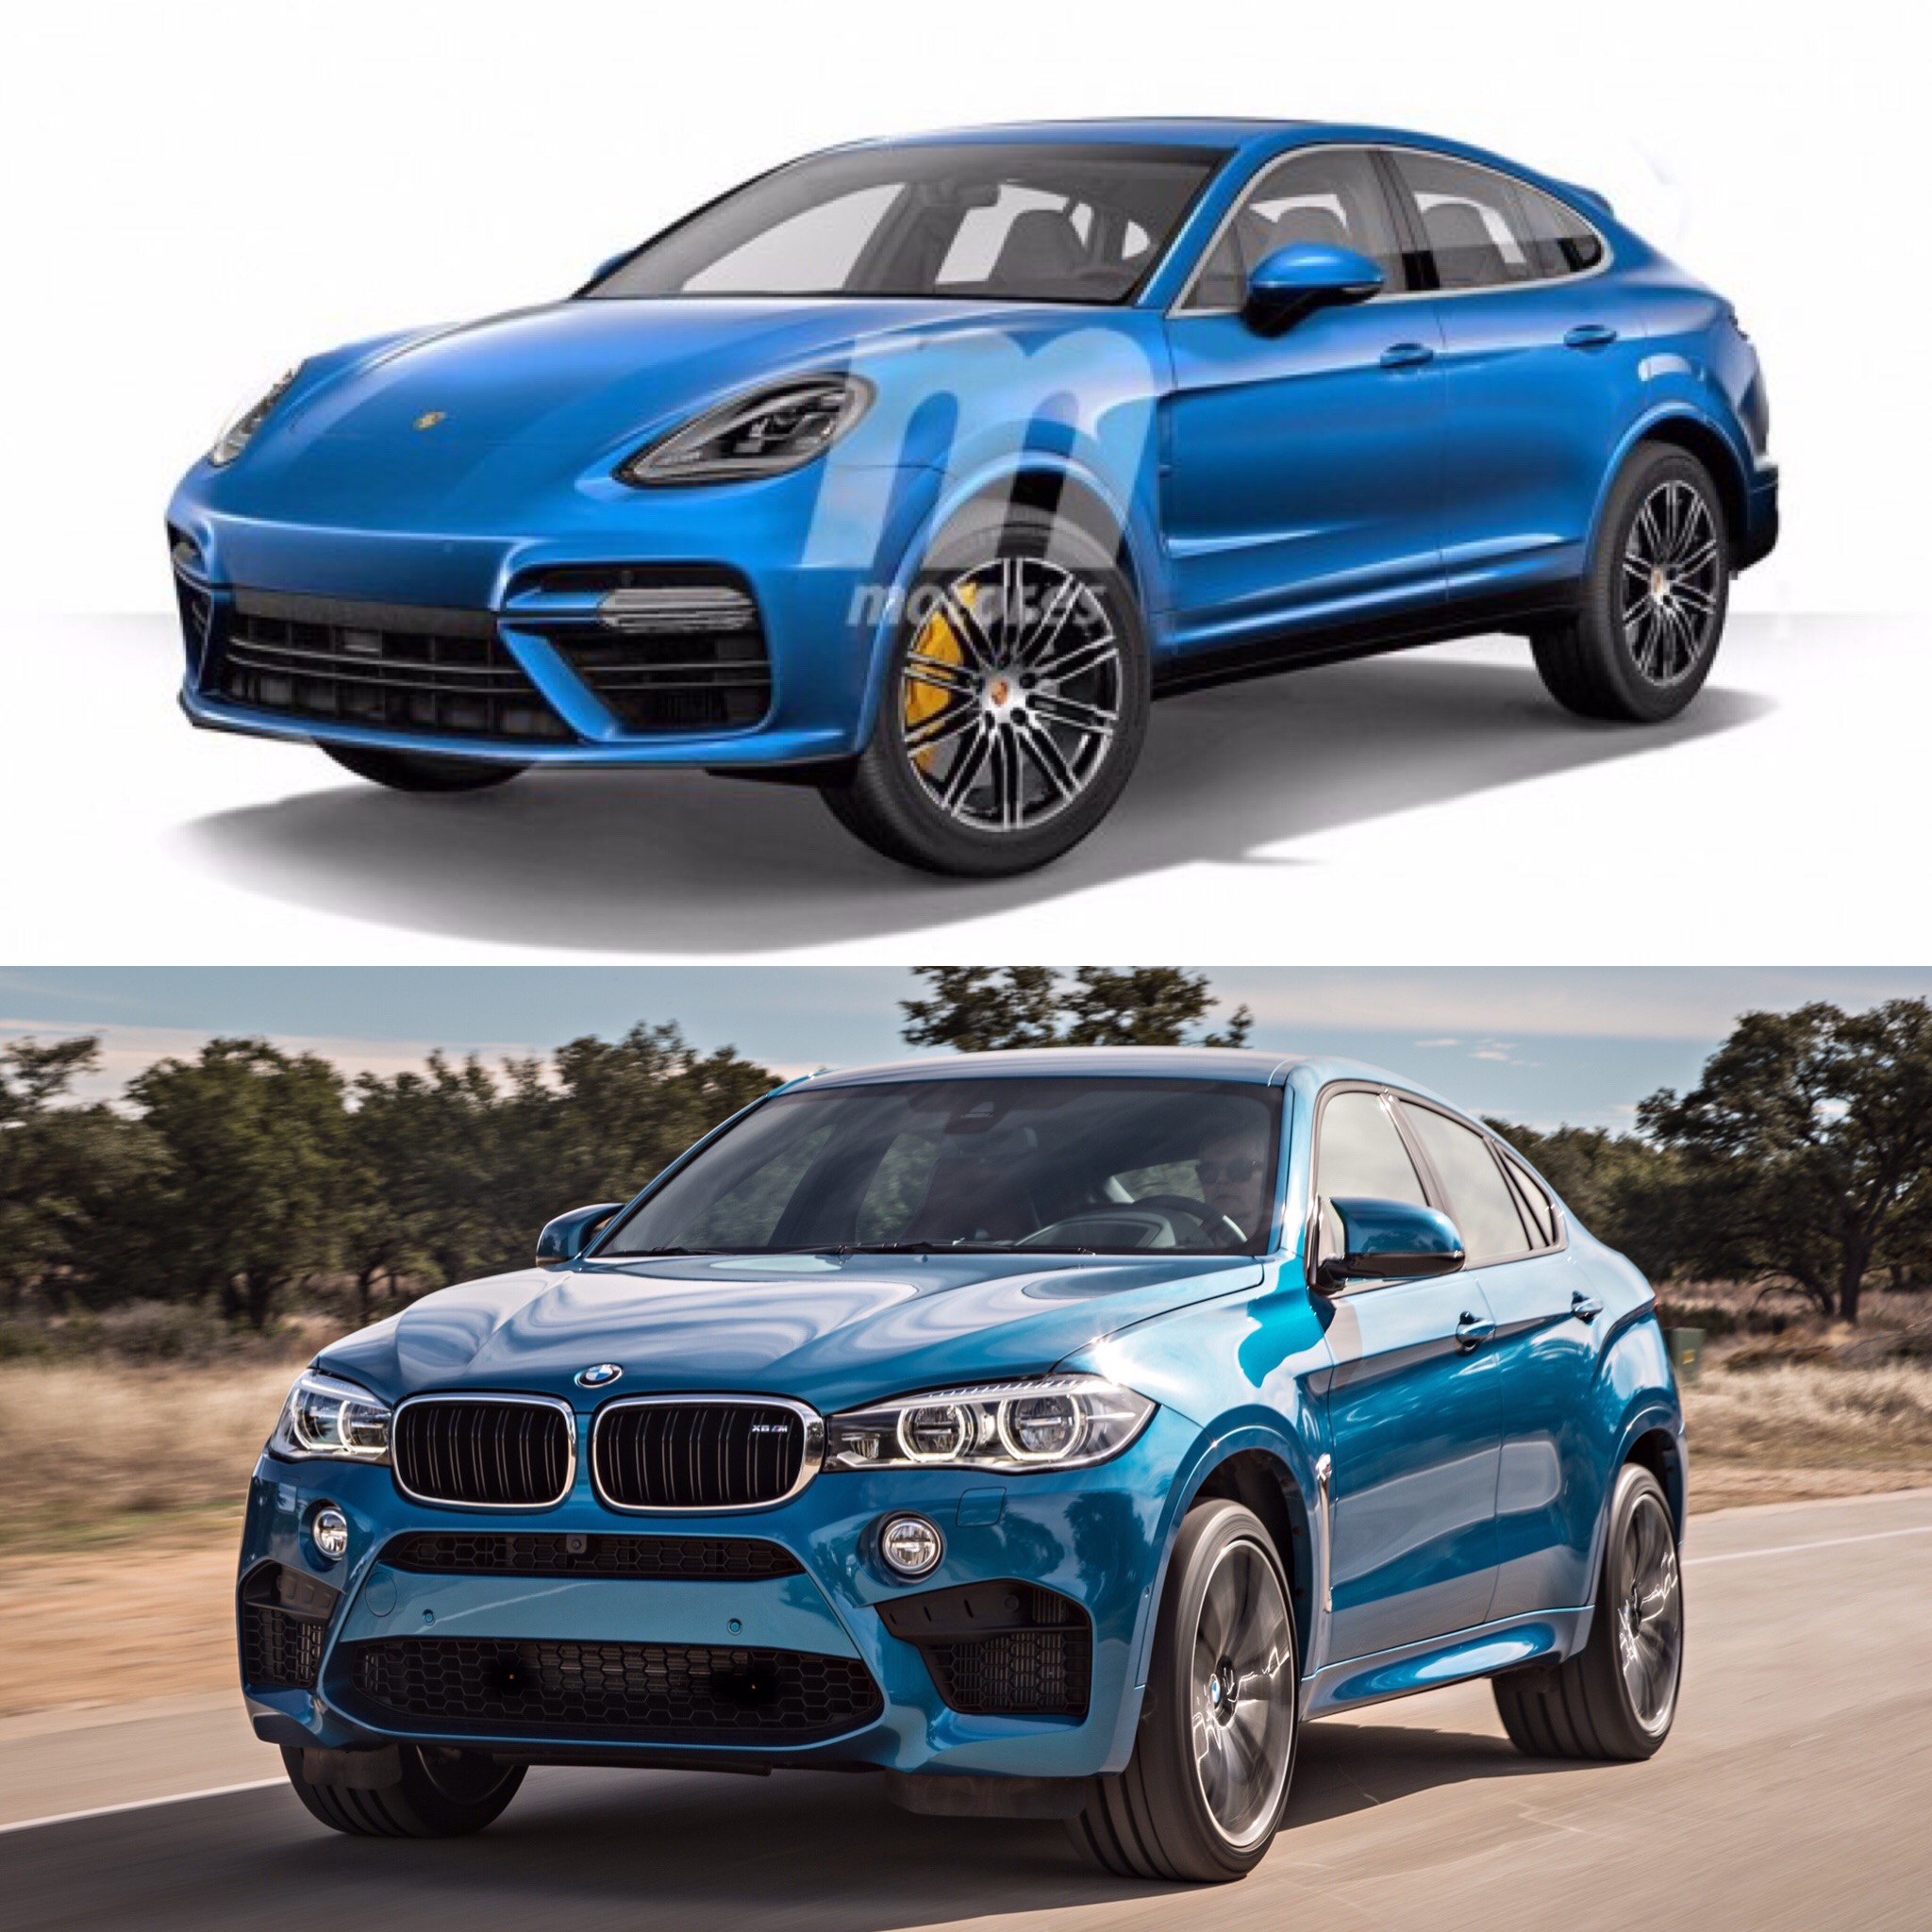 X6 v. БМВ x6 купе. BMW x6 vs x6. BMW x6 vs BMW x6m. BMW x6 Coupe 2021.